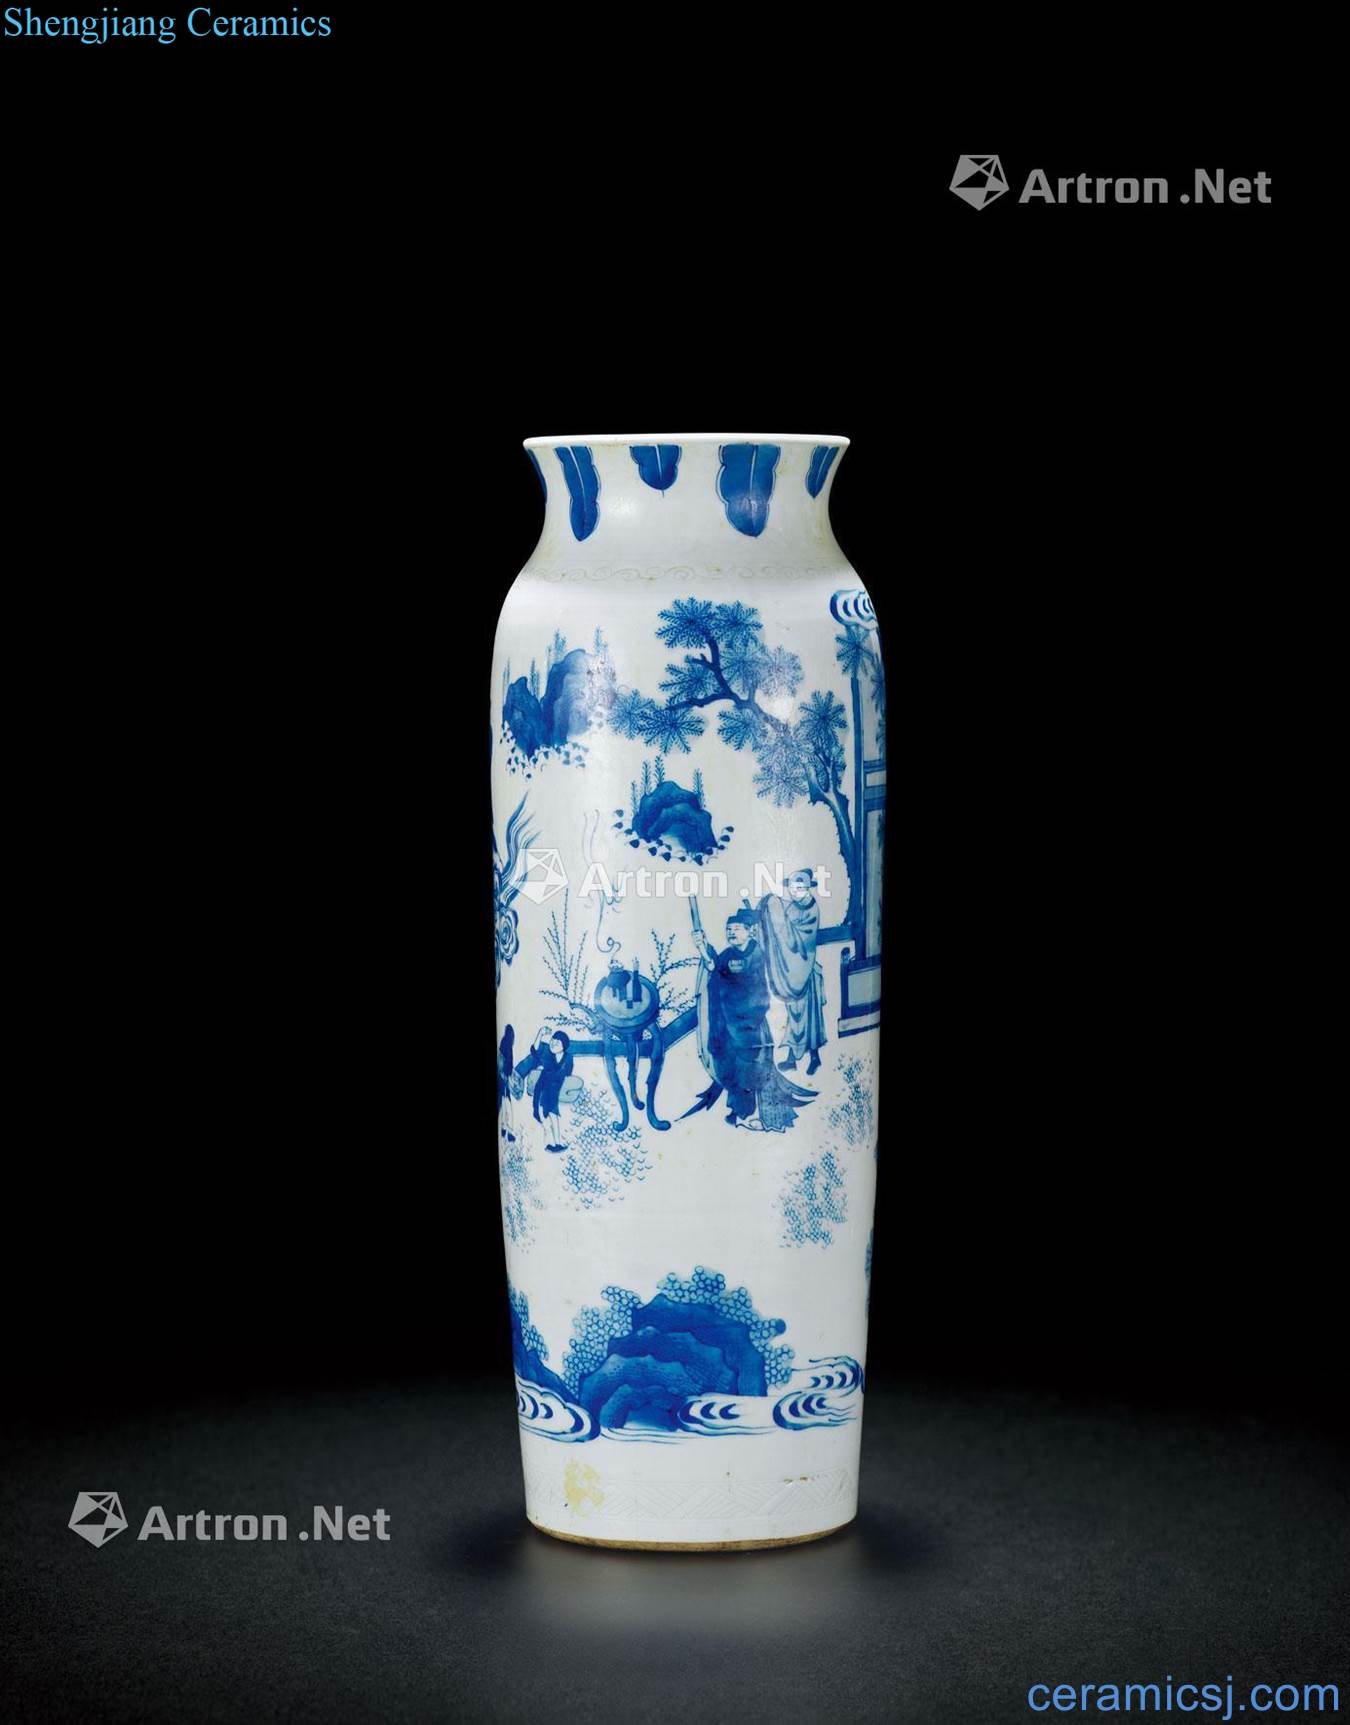 The late Ming dynasty Stories of blue and white lines cylinder bottles